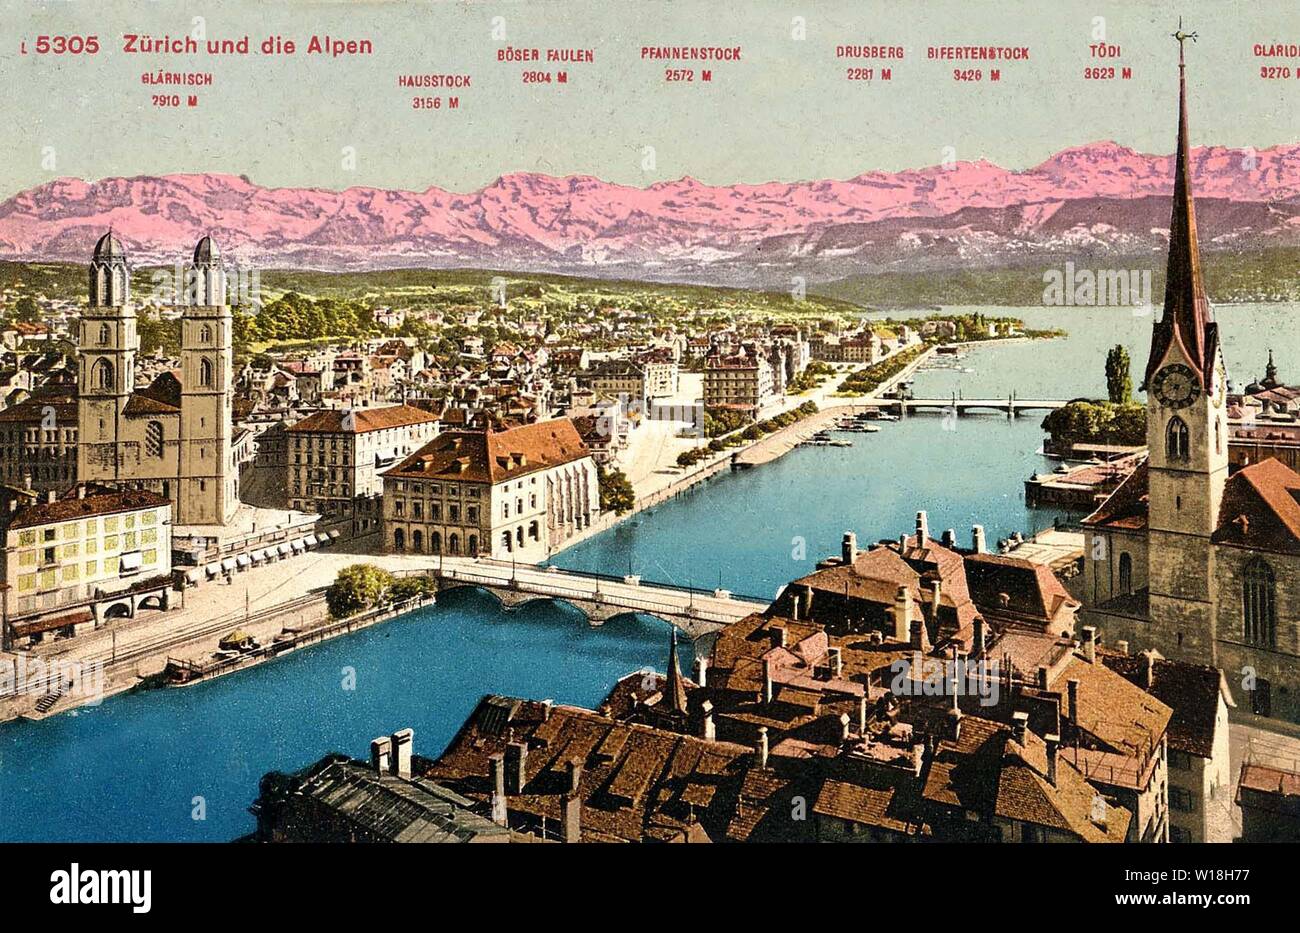 Zurich and the Alps. Postcard, 1910-s. Stock Photo